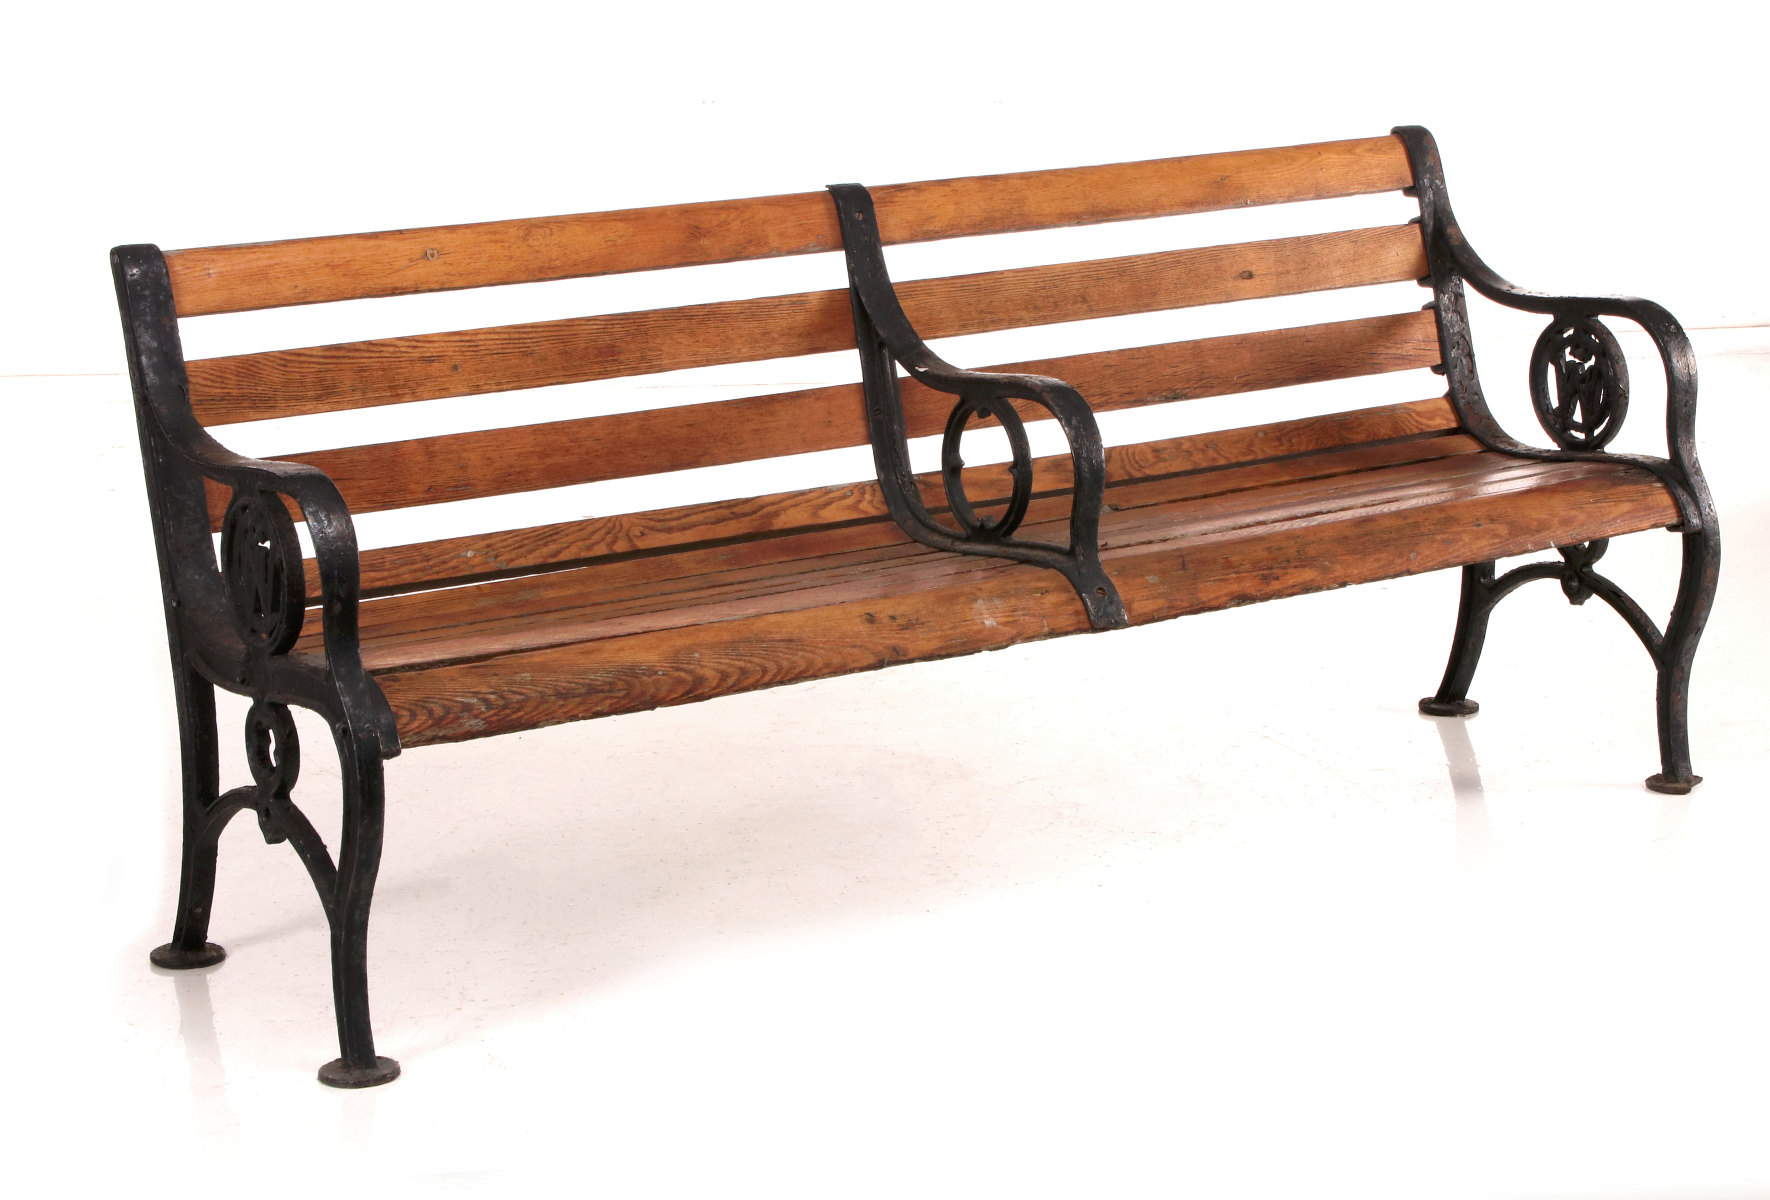 A 19TH C BENCH WITH CAST IRON C. & N. W. RAILROAD LOGOS